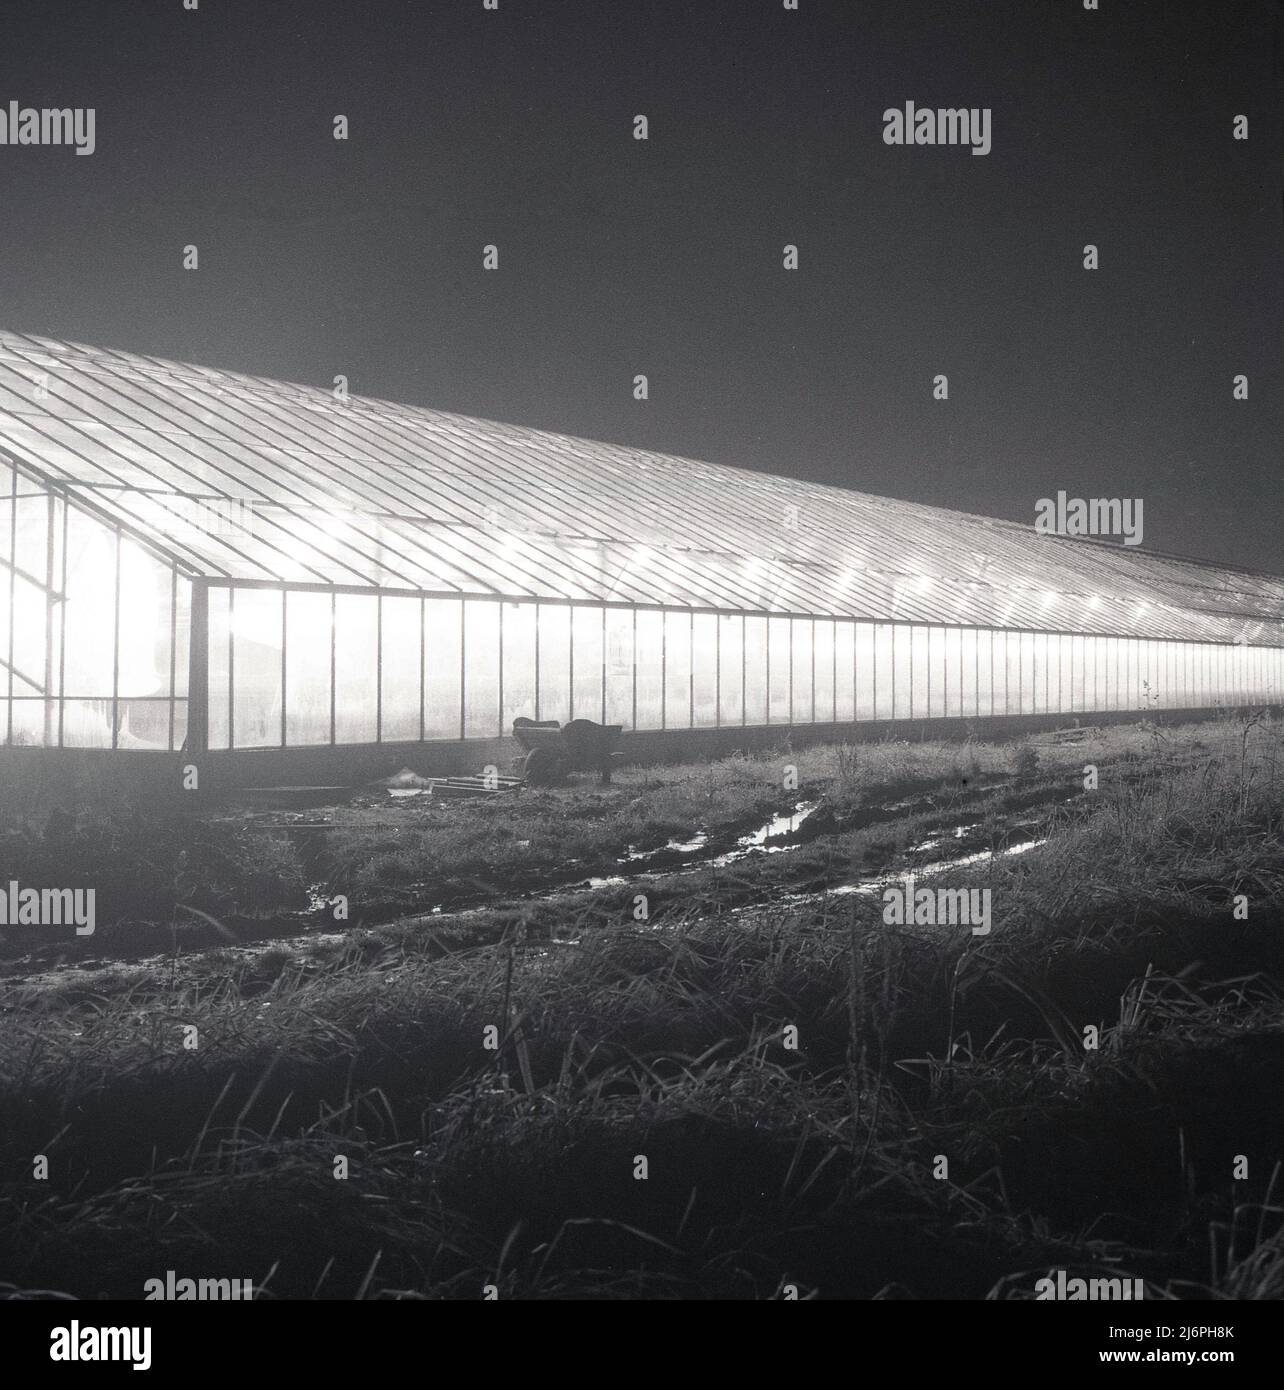 1950s, historical, giant glasshouse or greenhouse lit-up at night, Angmering, West Sussex, England, UK. The local horticultural company, A G Sparkes Ltd was a leading supplier of chrysanthemum flowers and one of the first in Britain to undertake 24 hour continuous production throughout the year. Stock Photo